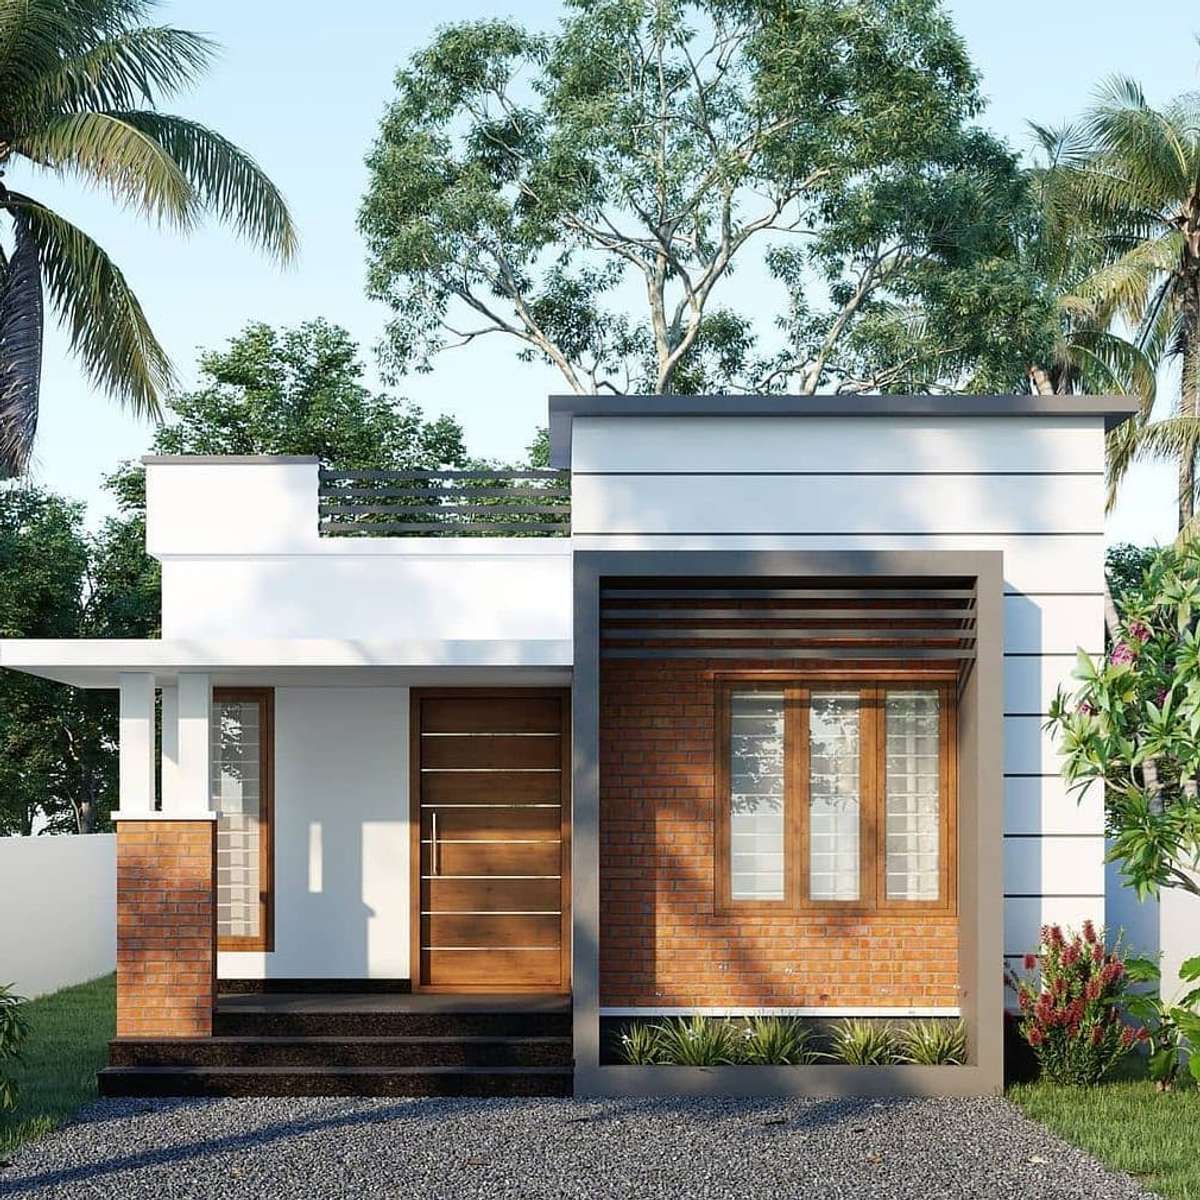 Designs by Contractor Rohini builders Architects, Thrissur | Kolo